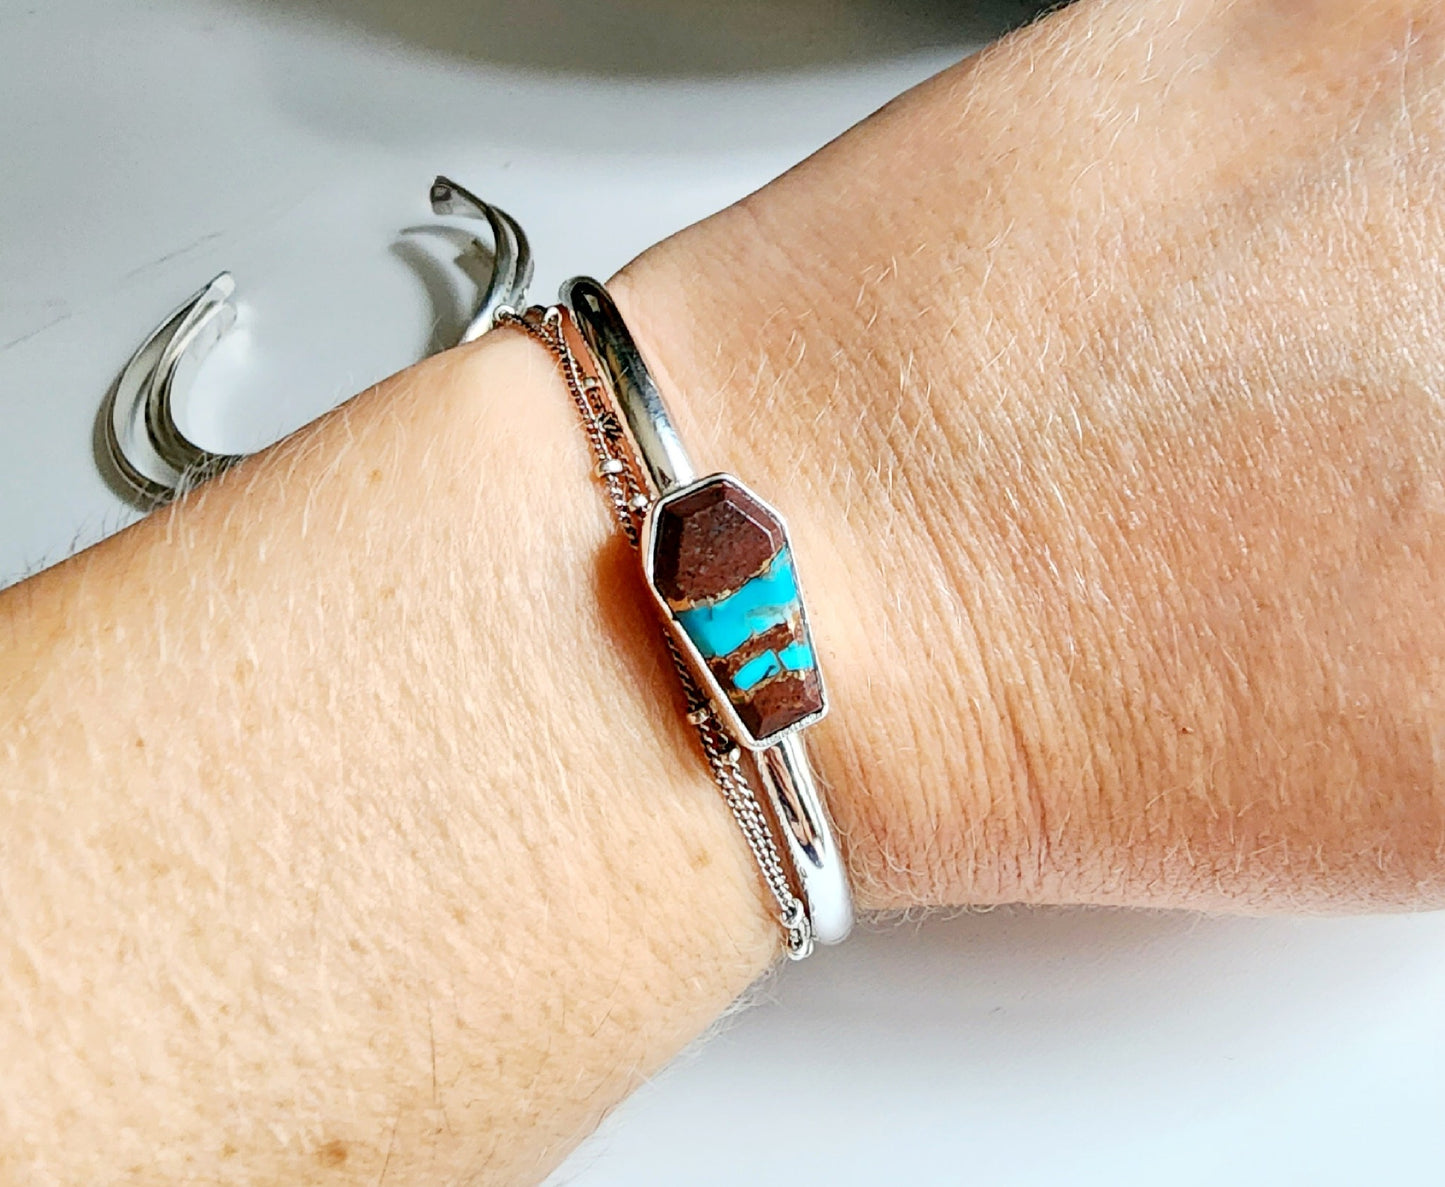 a coffin shaped stone that is blue and red (lave copper turquoise) mounted on a simple sterling silver cuff